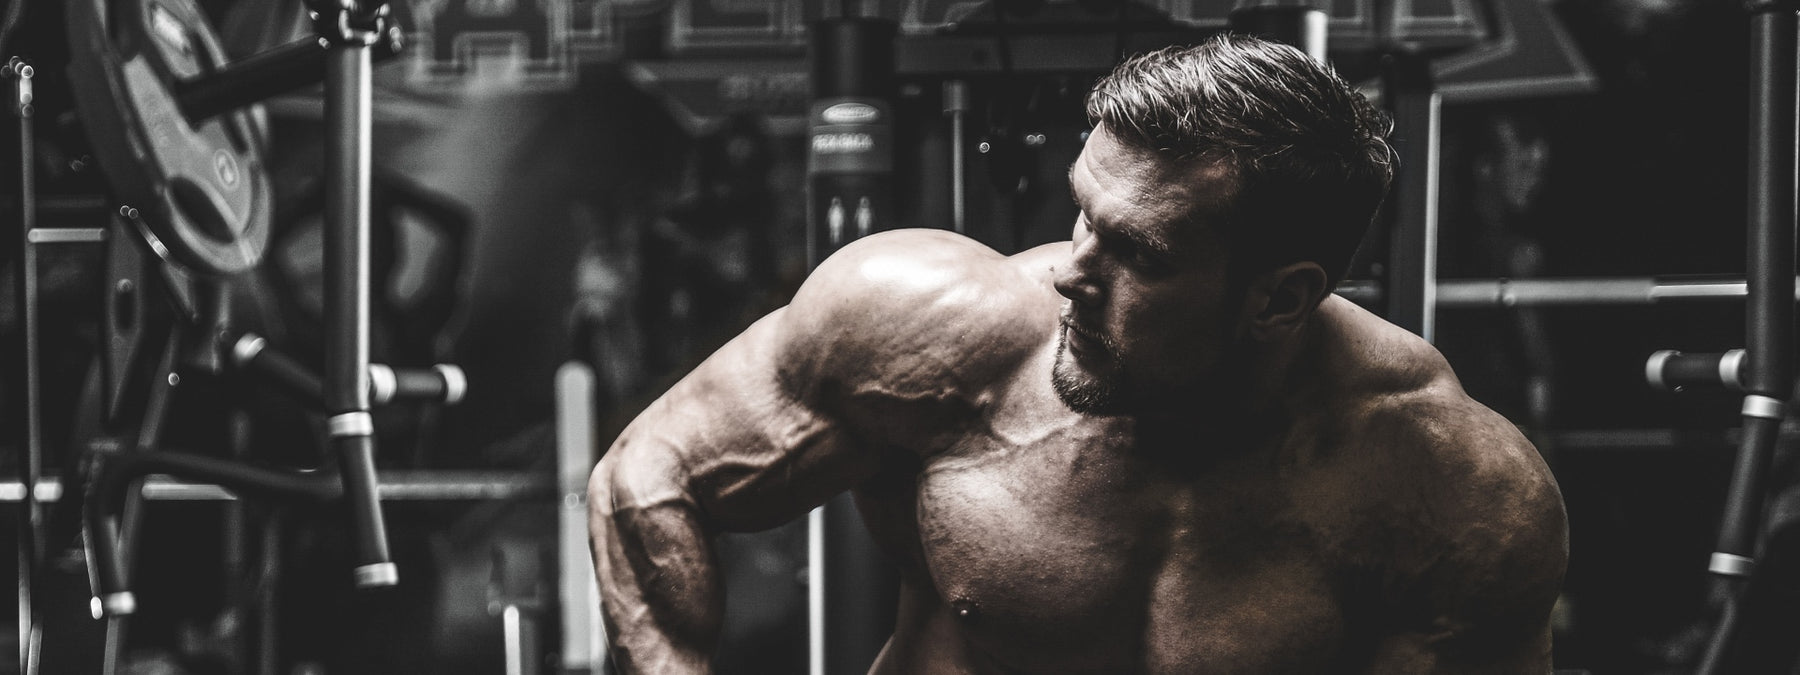 Destroy Bench Press Workouts With These 8 Powerful Tips